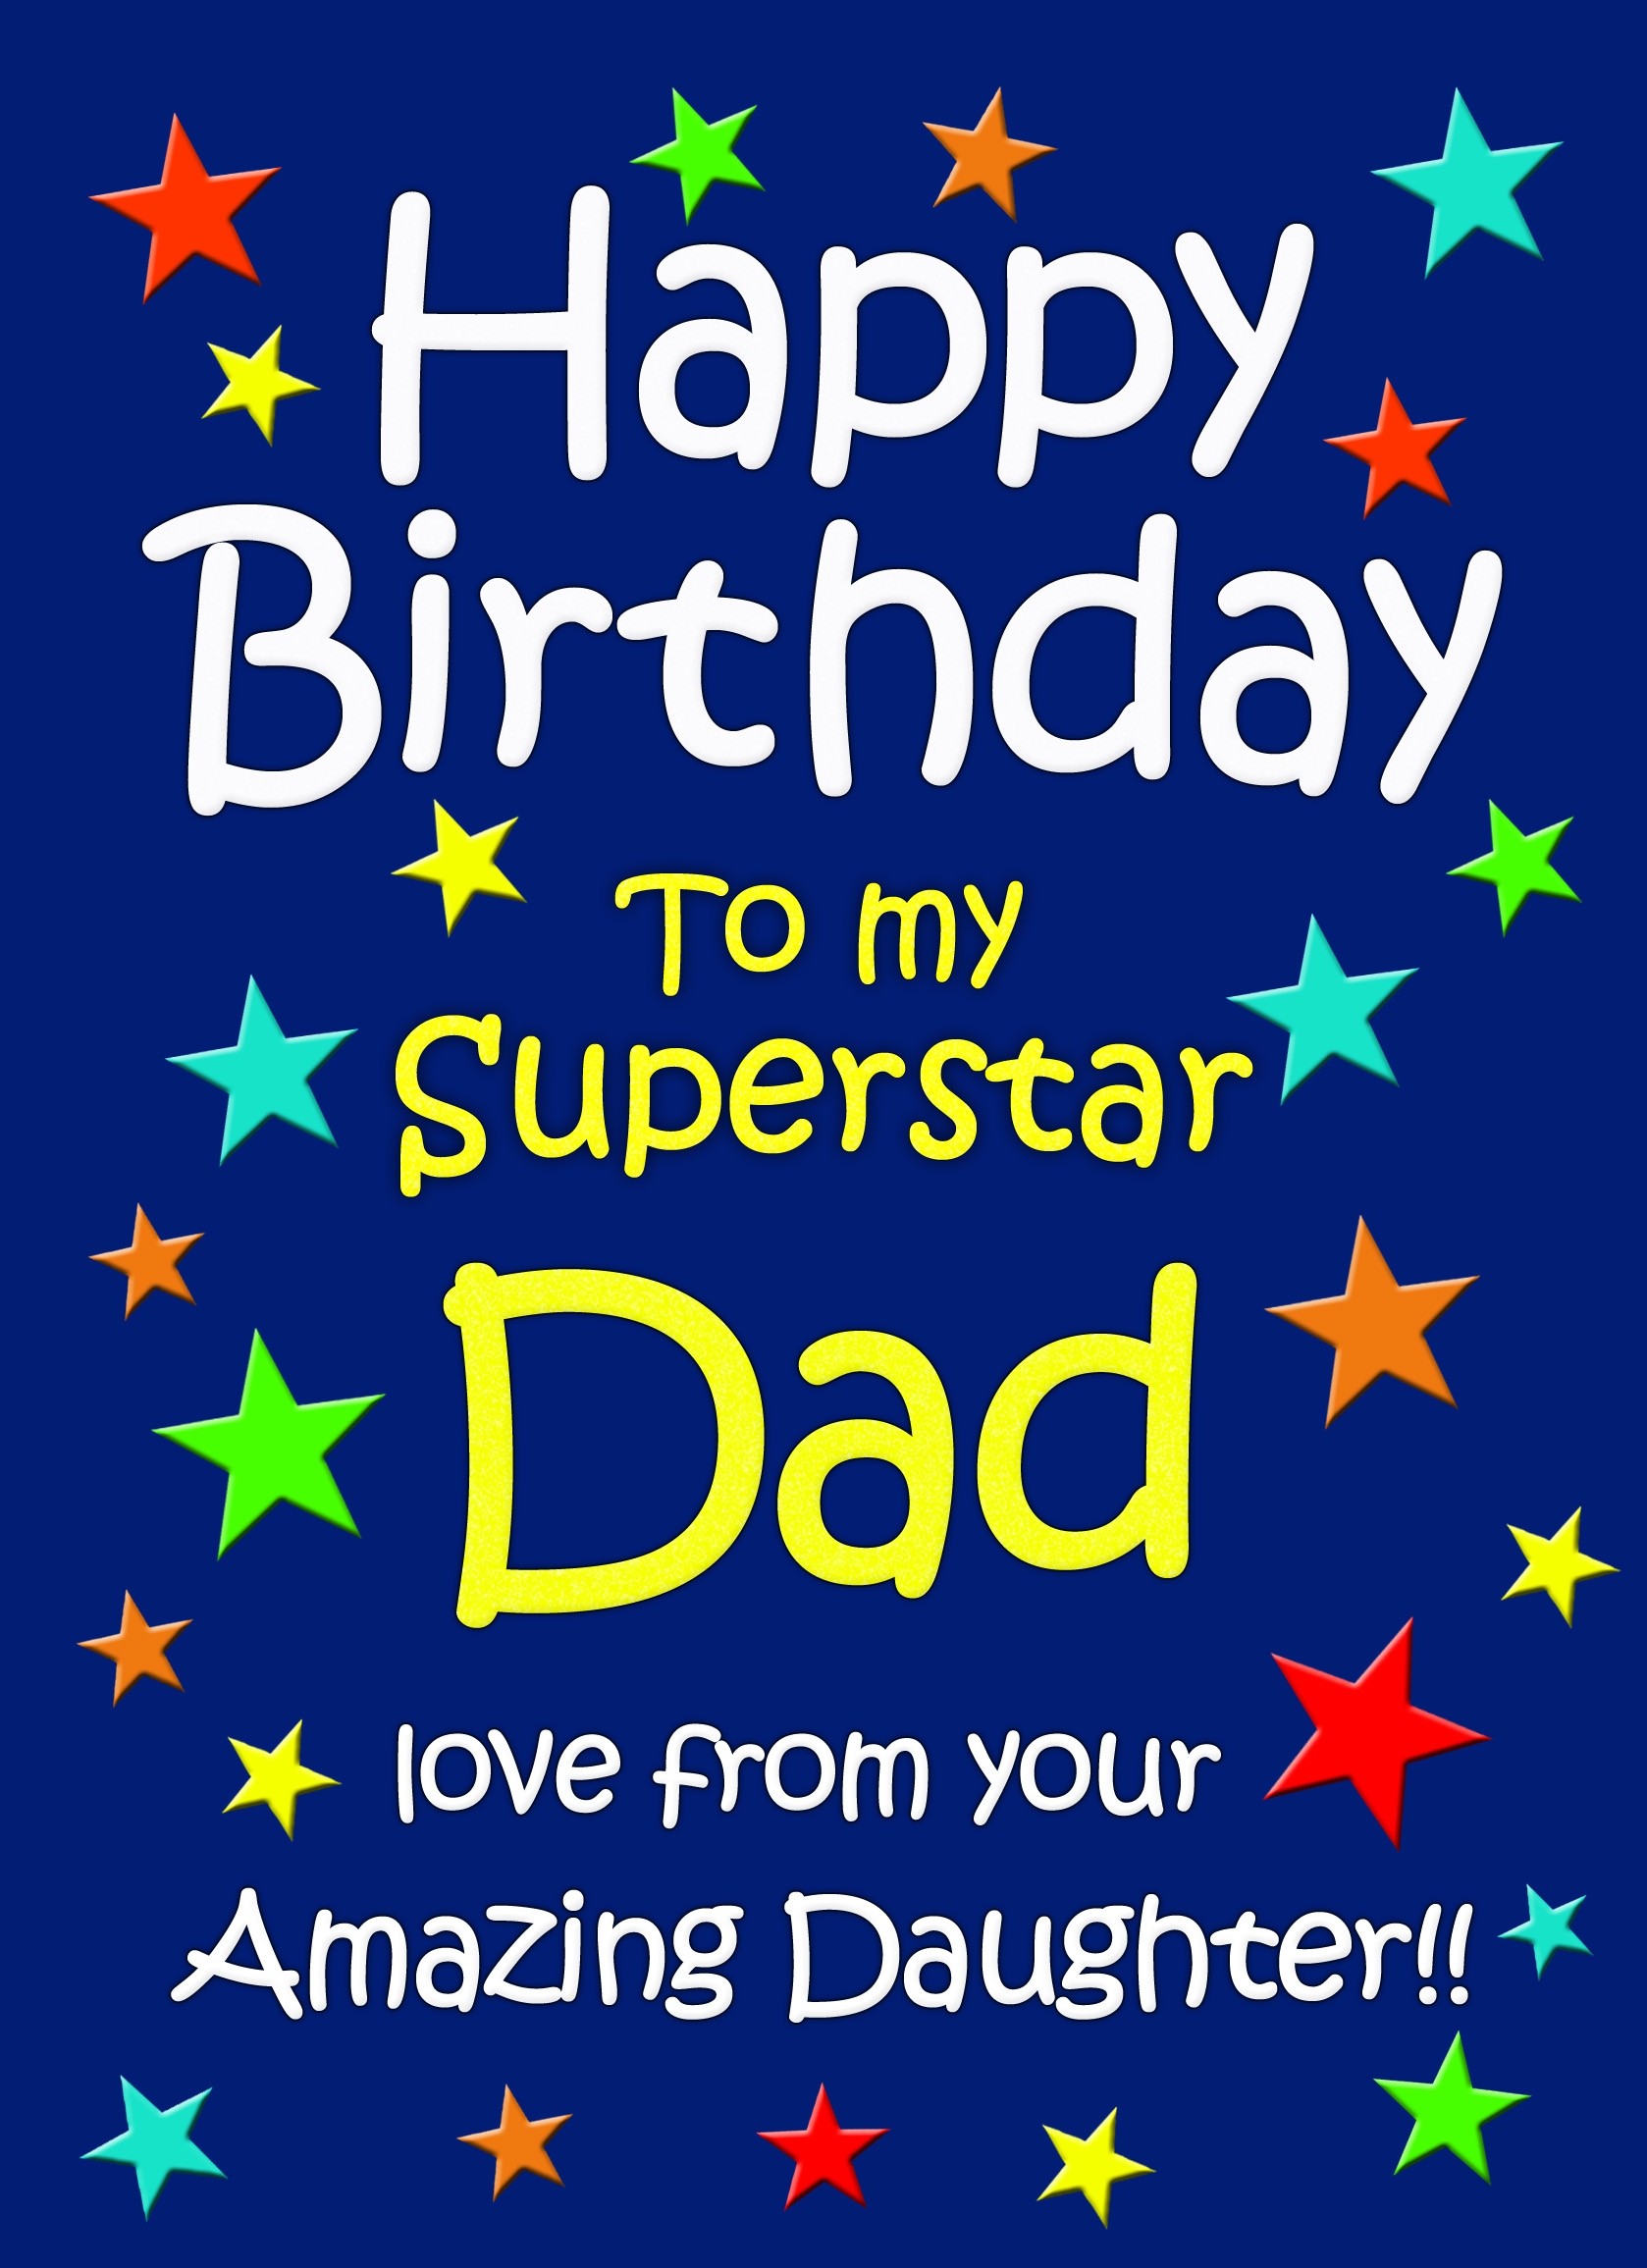 Dad Birthday Card from Daughter